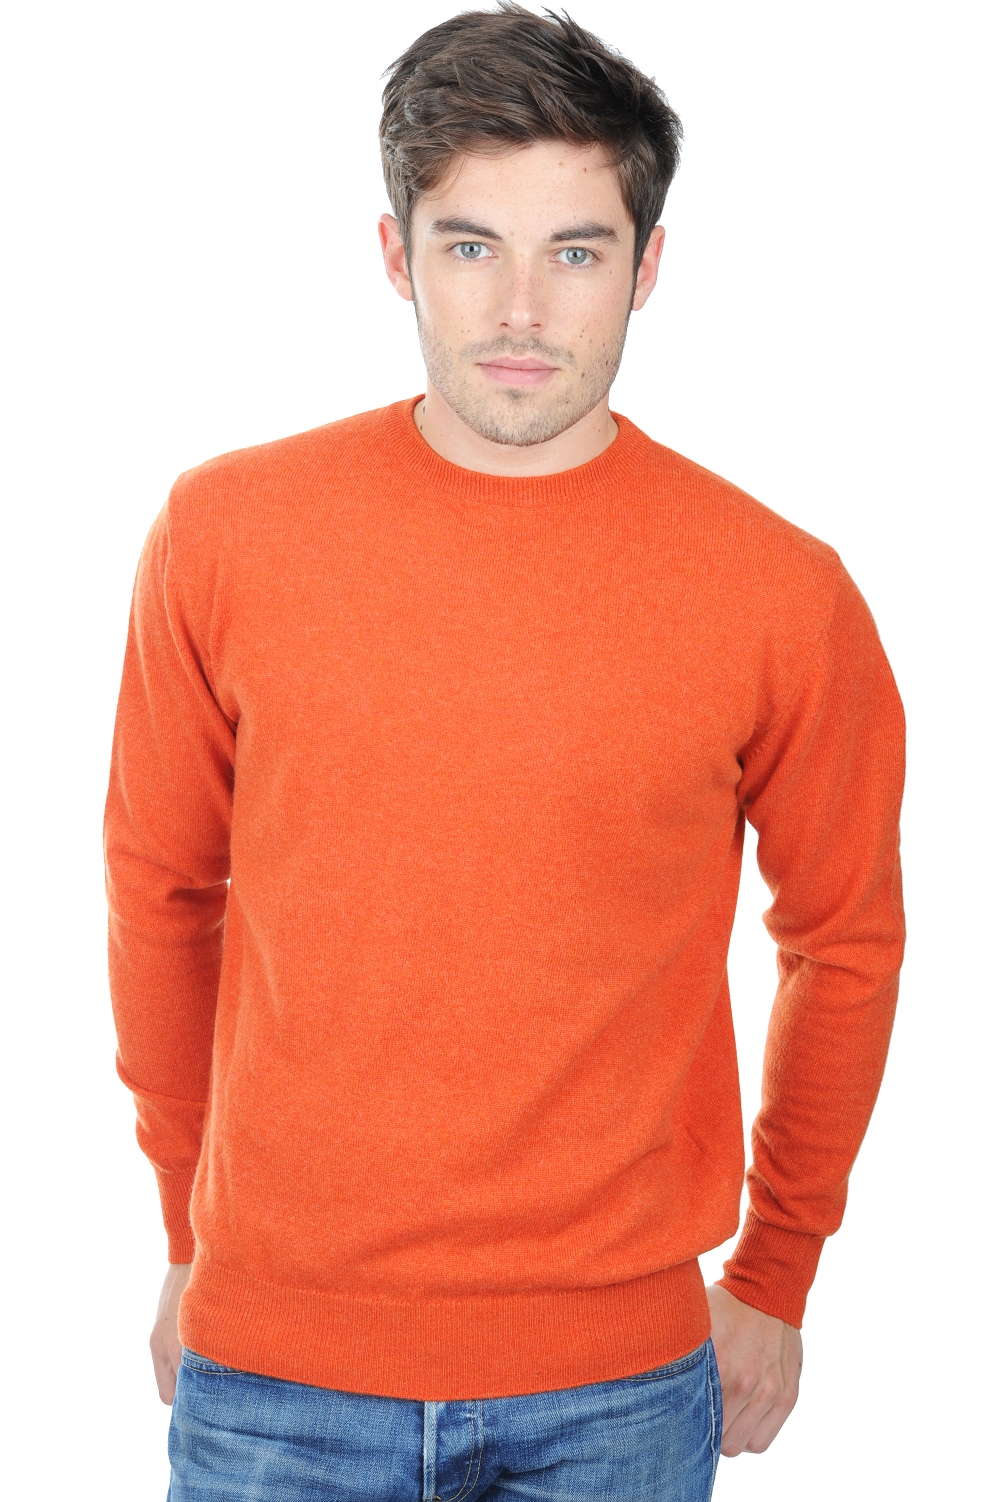 Cachemire pull homme col rond nestor paprika 4xl